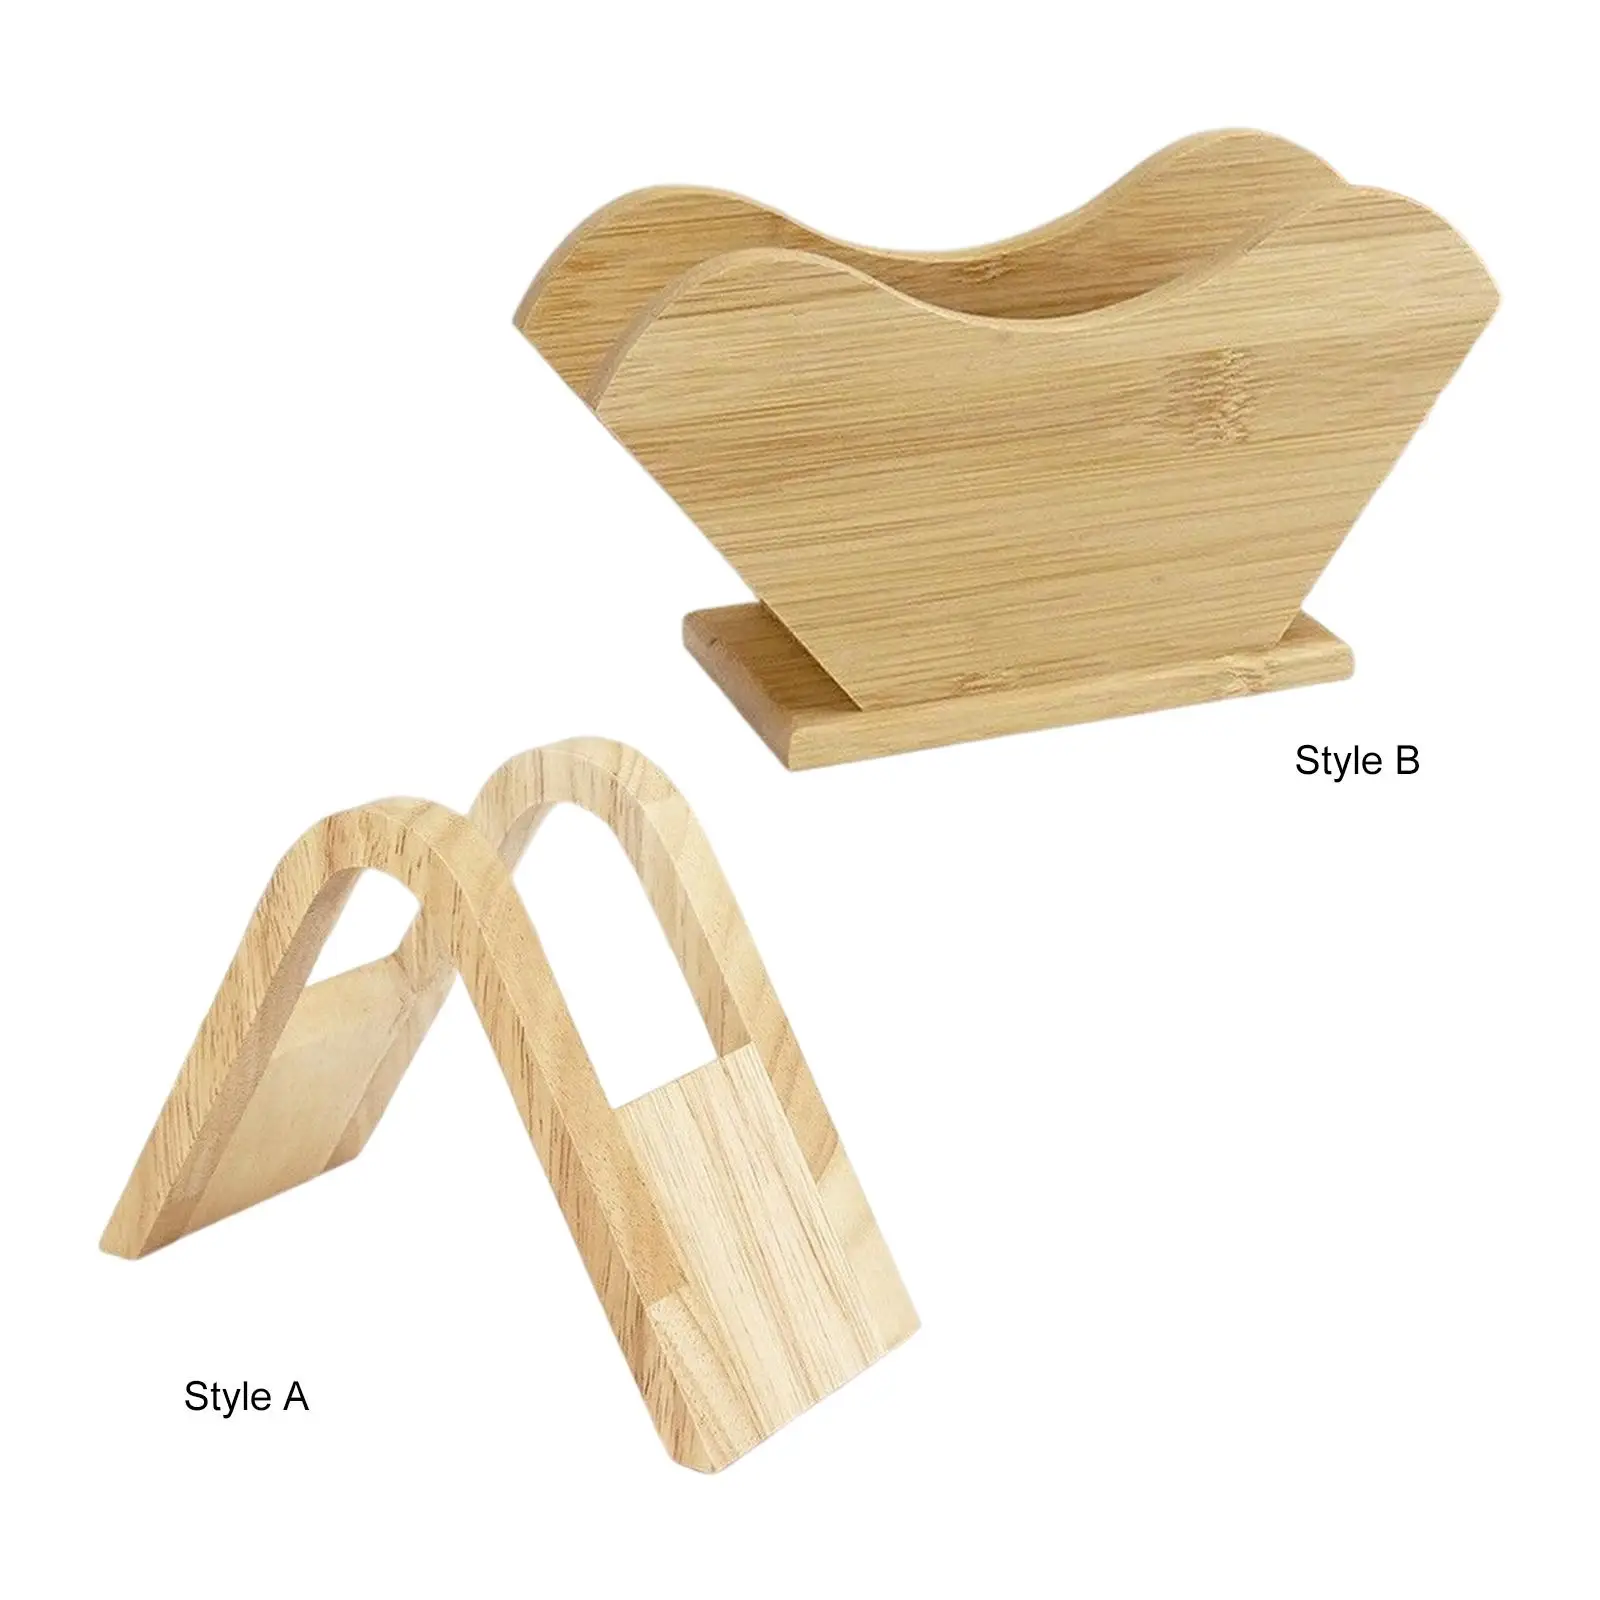 V Shape Coffee Filter Holder Standing Coffee Utensil Stand Storage Rack Wood for Countertop Kitchen